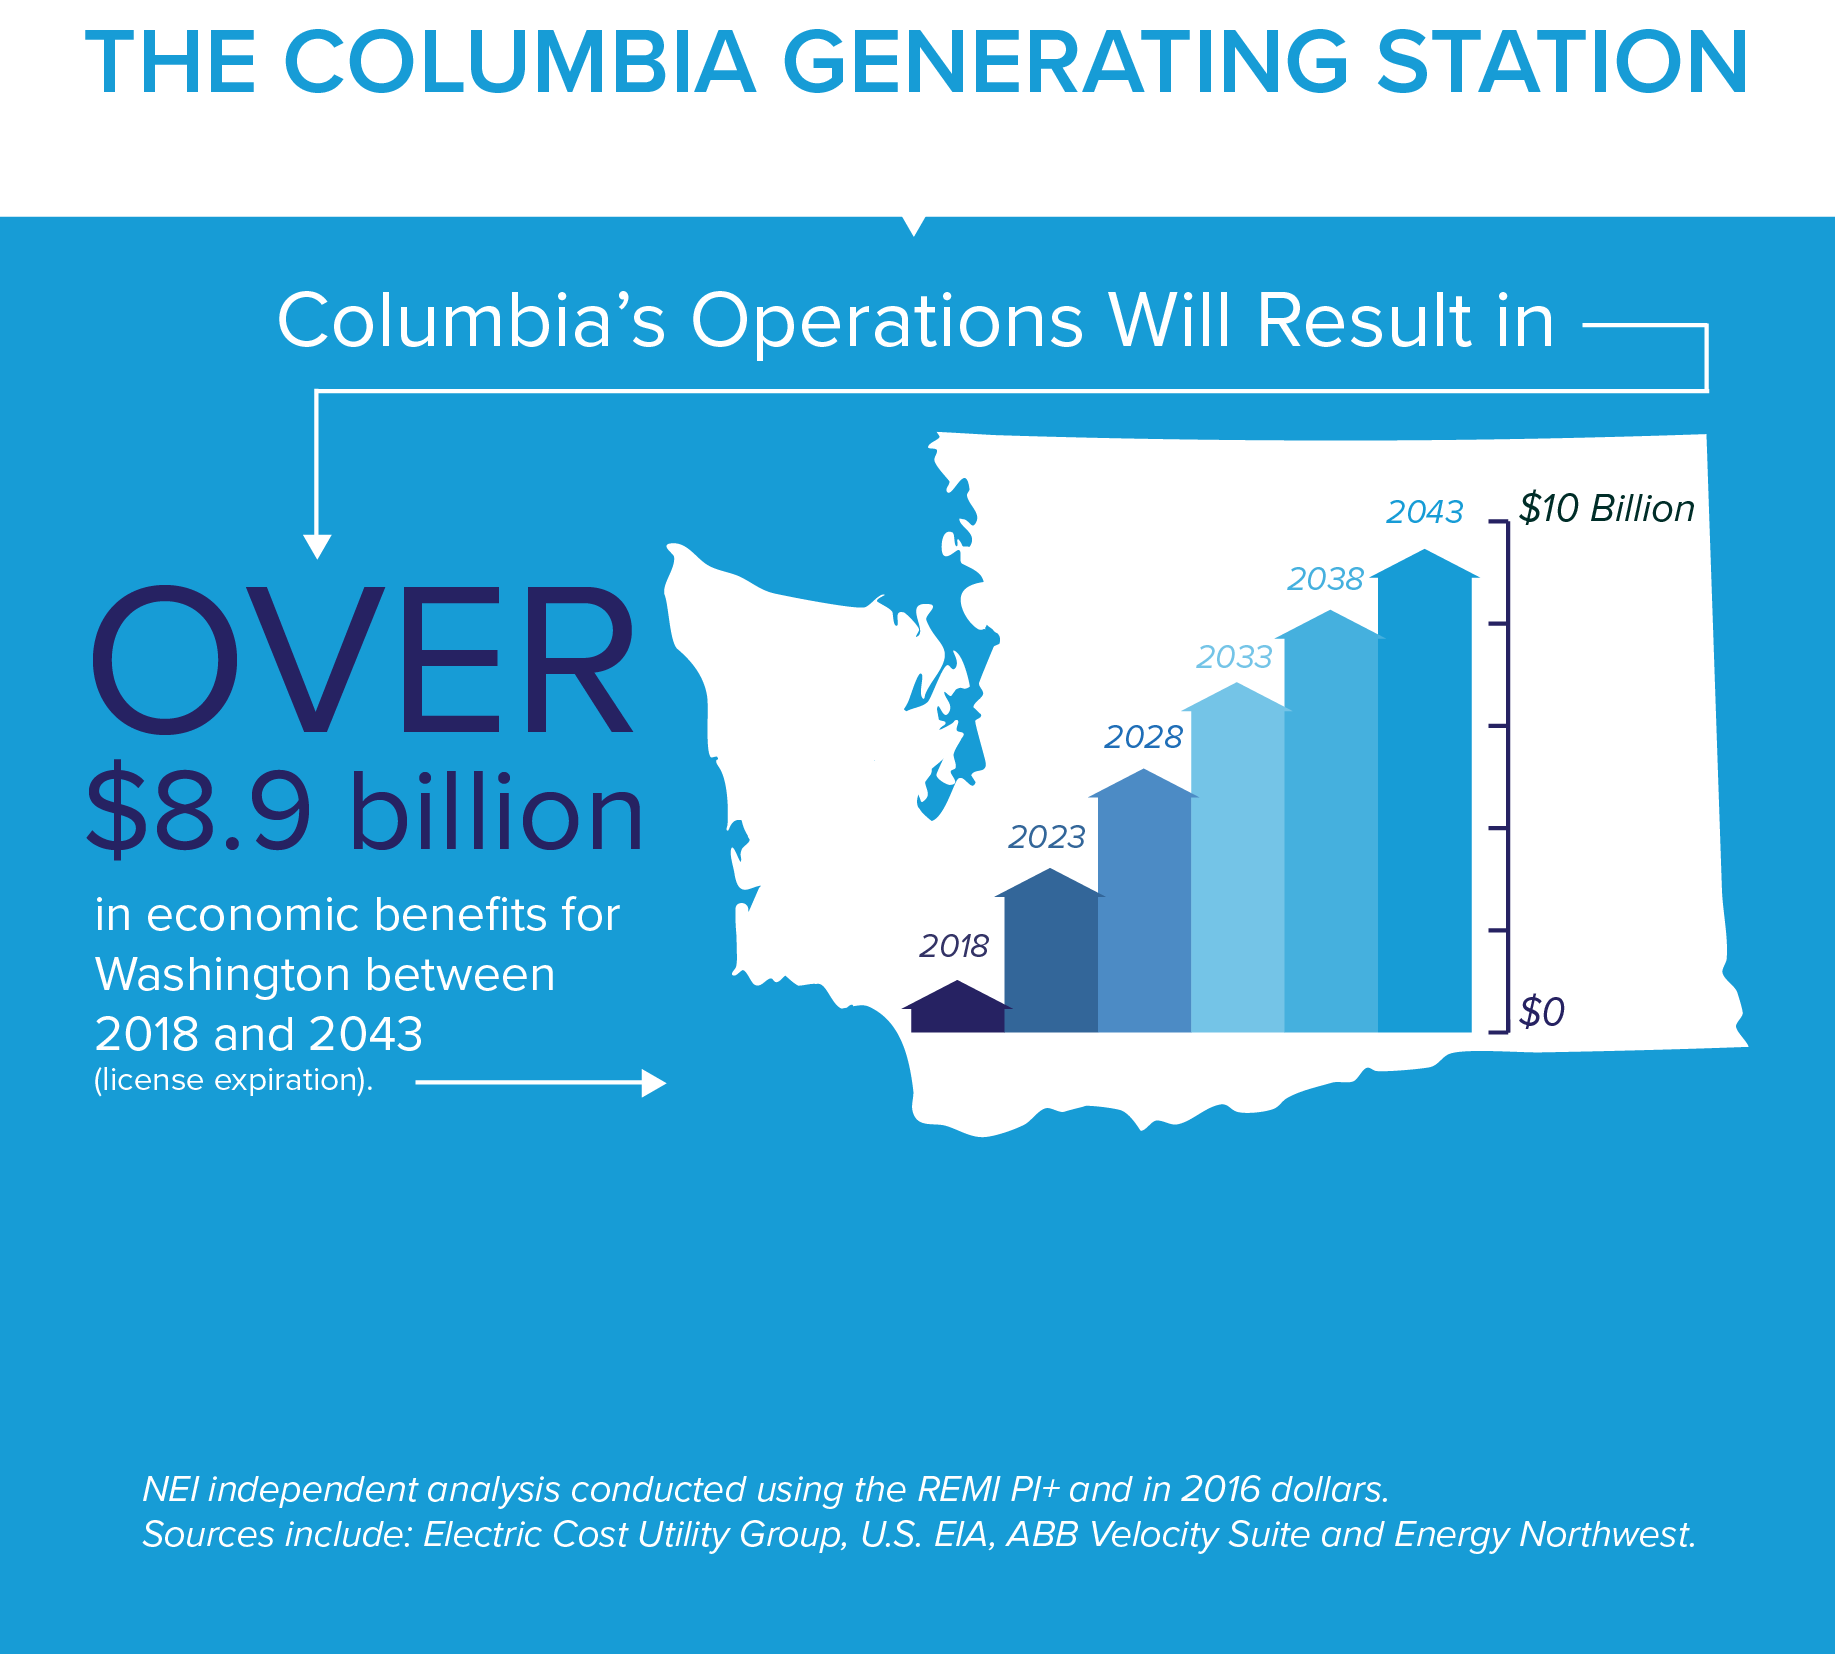 The Columbia Generating Station: Columbia's operations will result in over a billion dollars in economic benefits for Washington between 2018 and 2043 (license expiration)